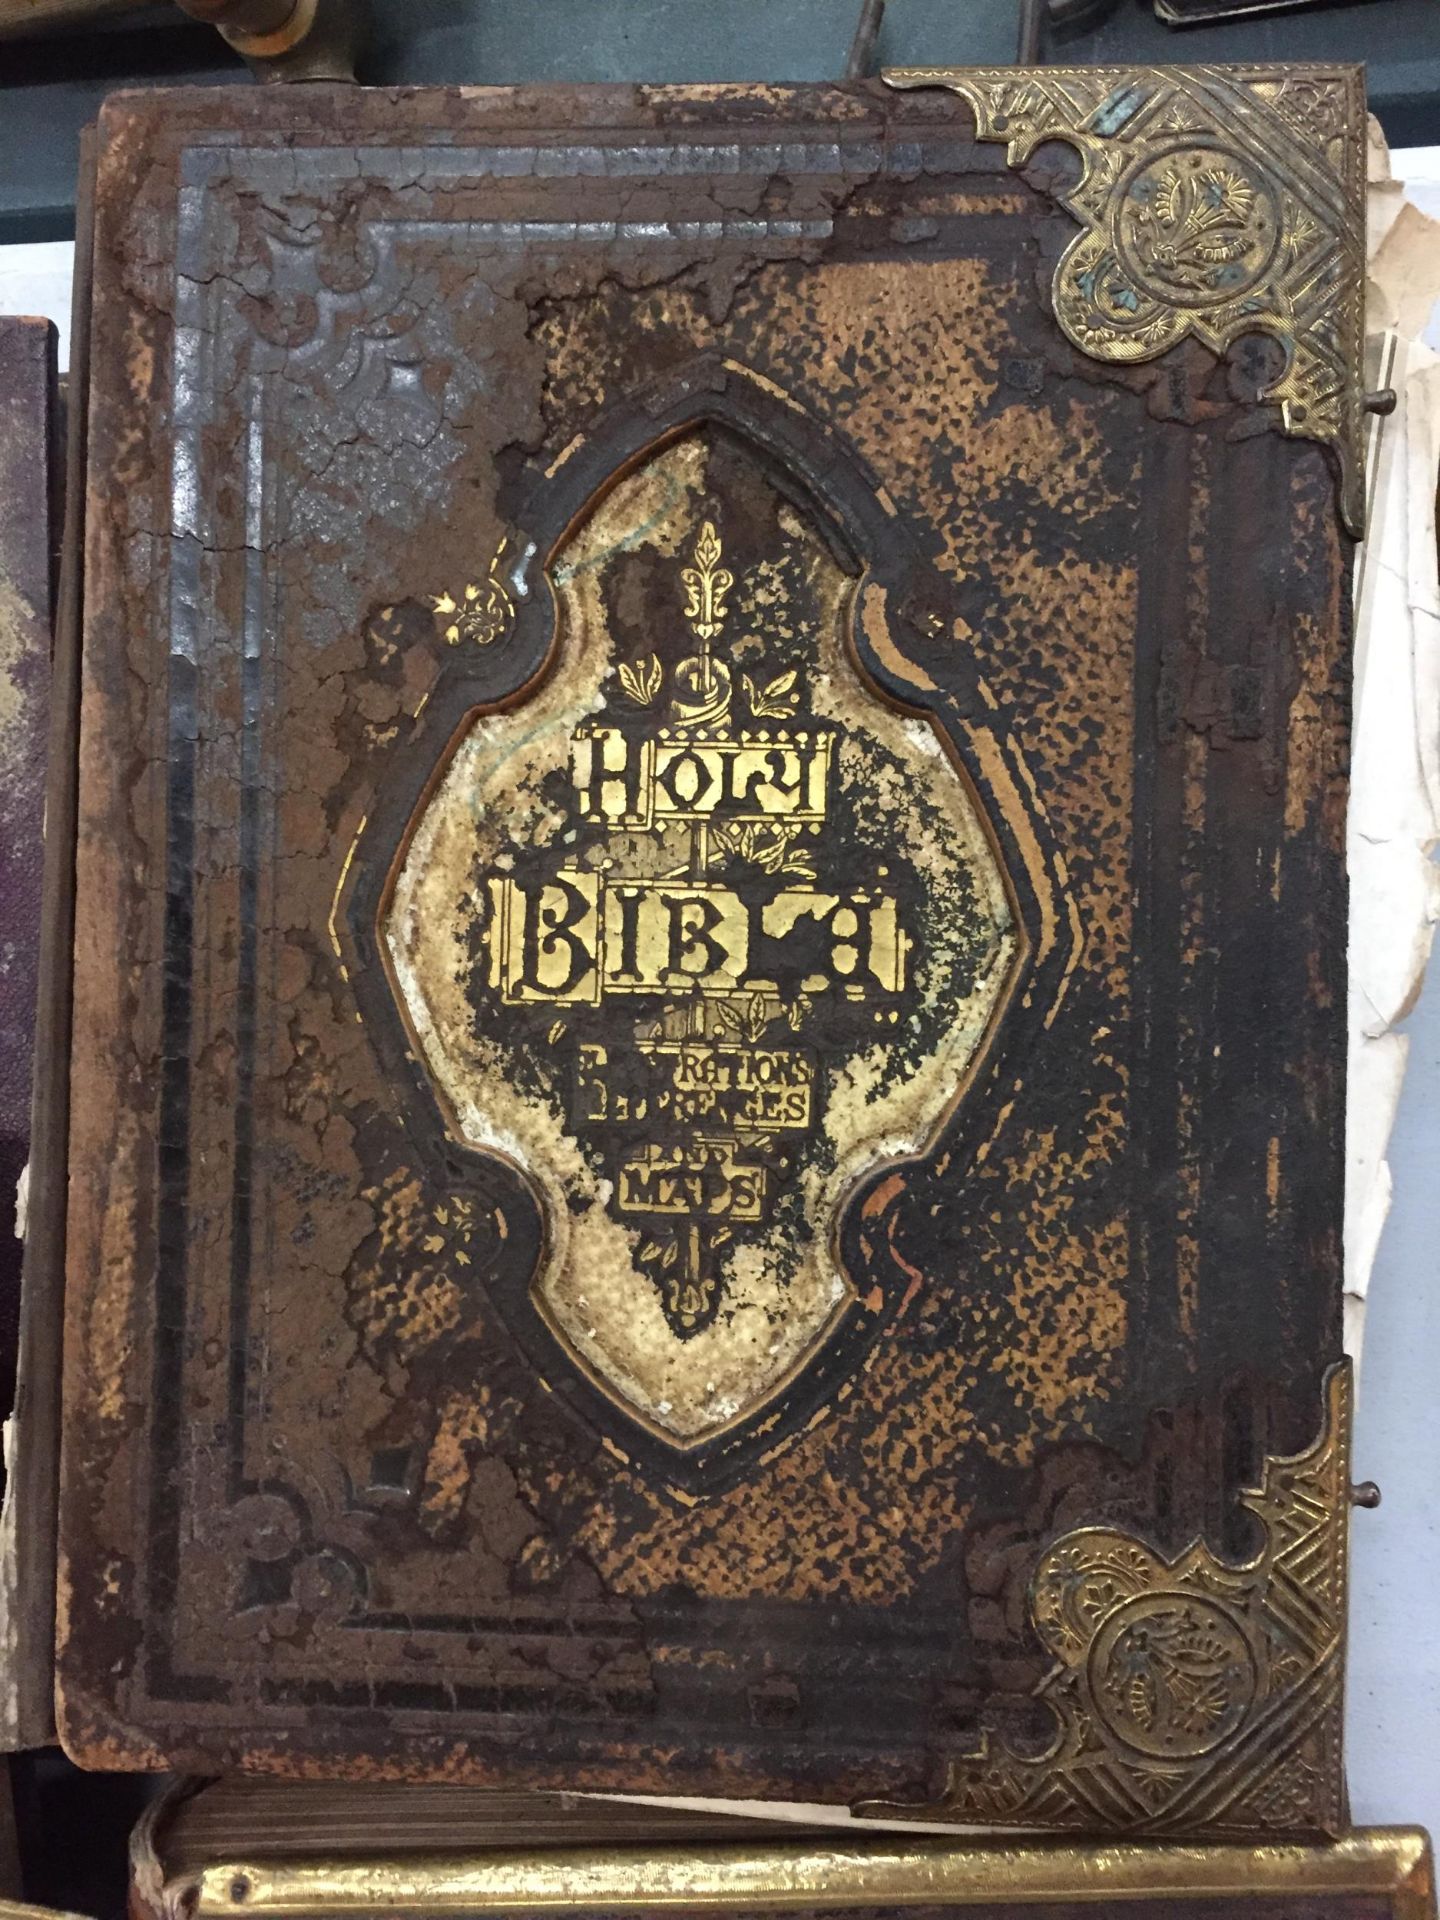 A COLLECTION OF FIVE BOOKS TO INCLUDE TWO LARGE BRASS BOUND OLD LEATHER BIBLES, VOLUMES 1 & 2 OF - Image 3 of 5